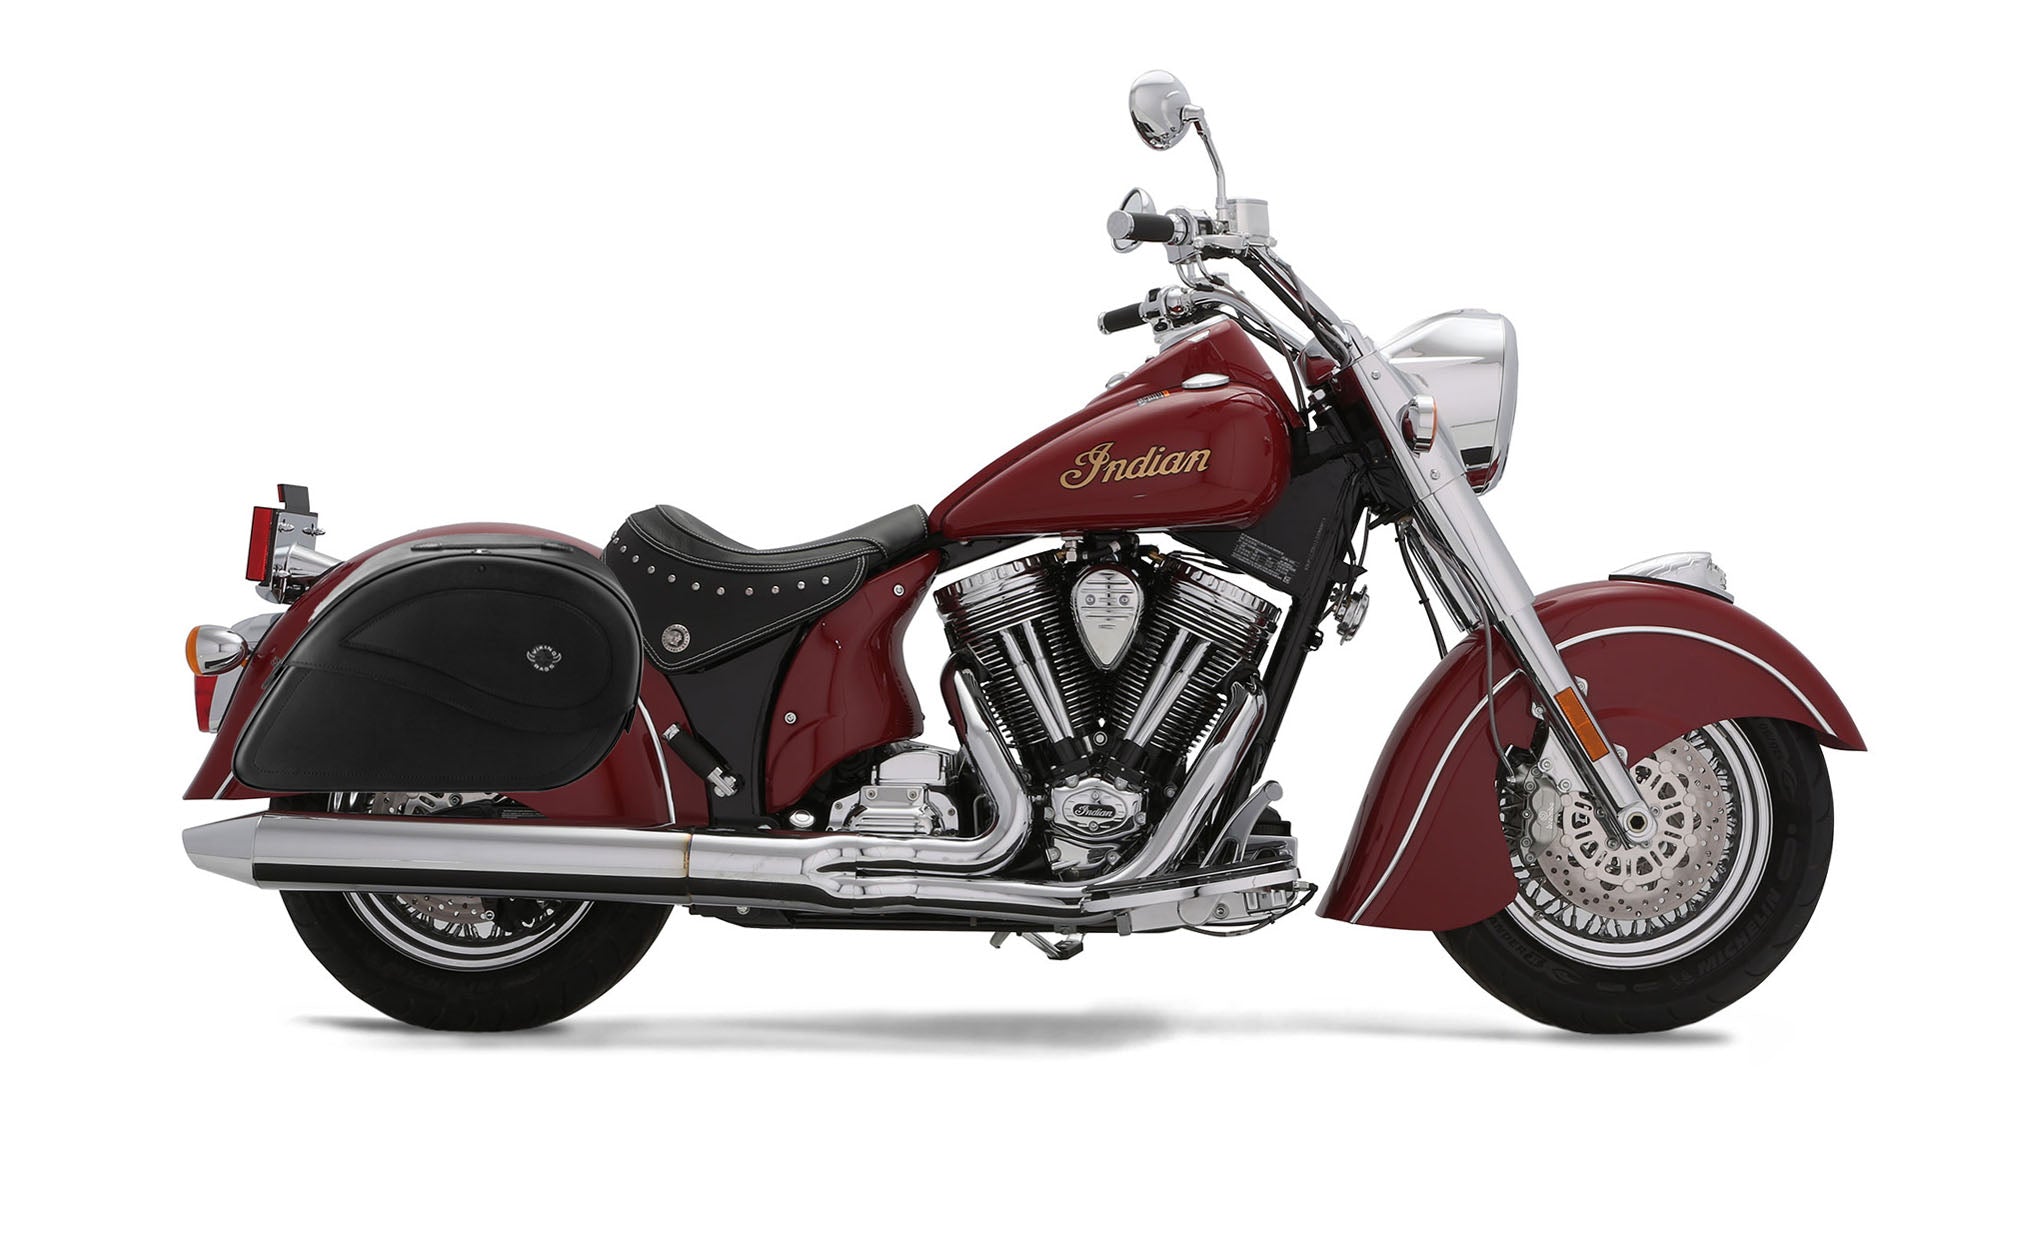 Viking Ultimate Large Indian Chief Deluxe Leather Motorcycle Saddlebags on Bike Photo @expand